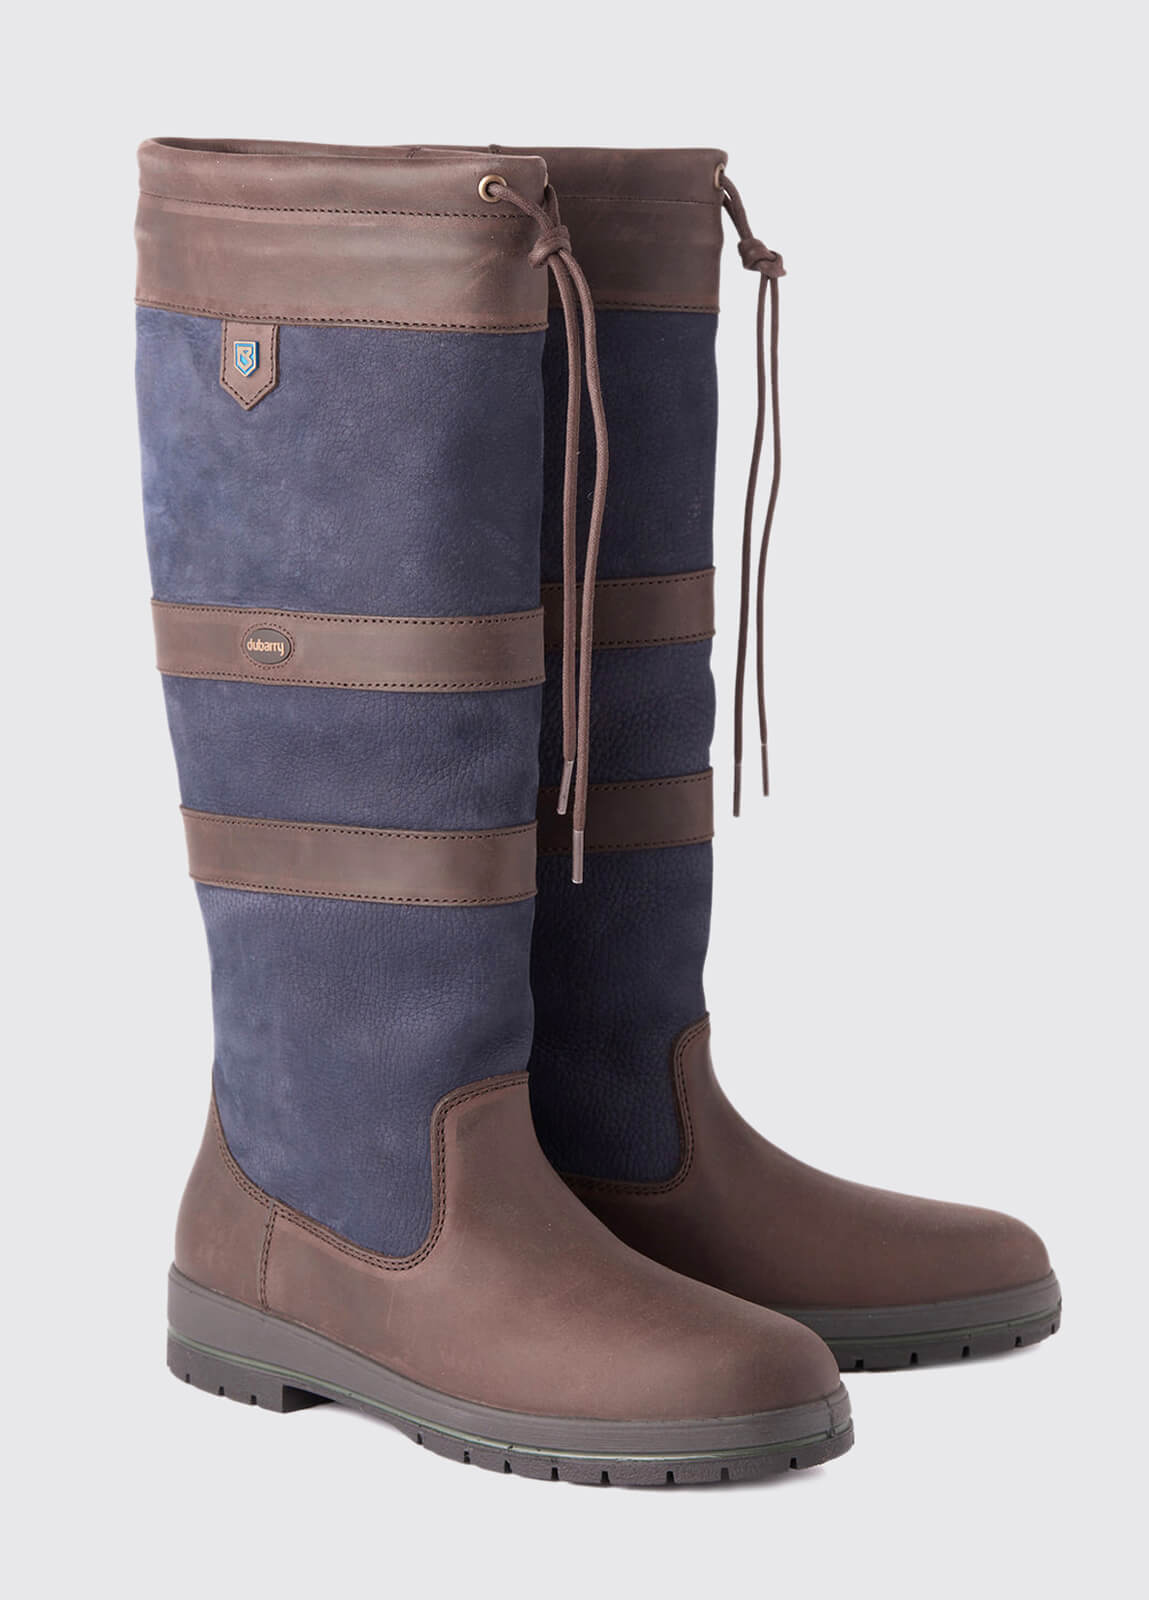 Galway Country Boot - Navy/Brown